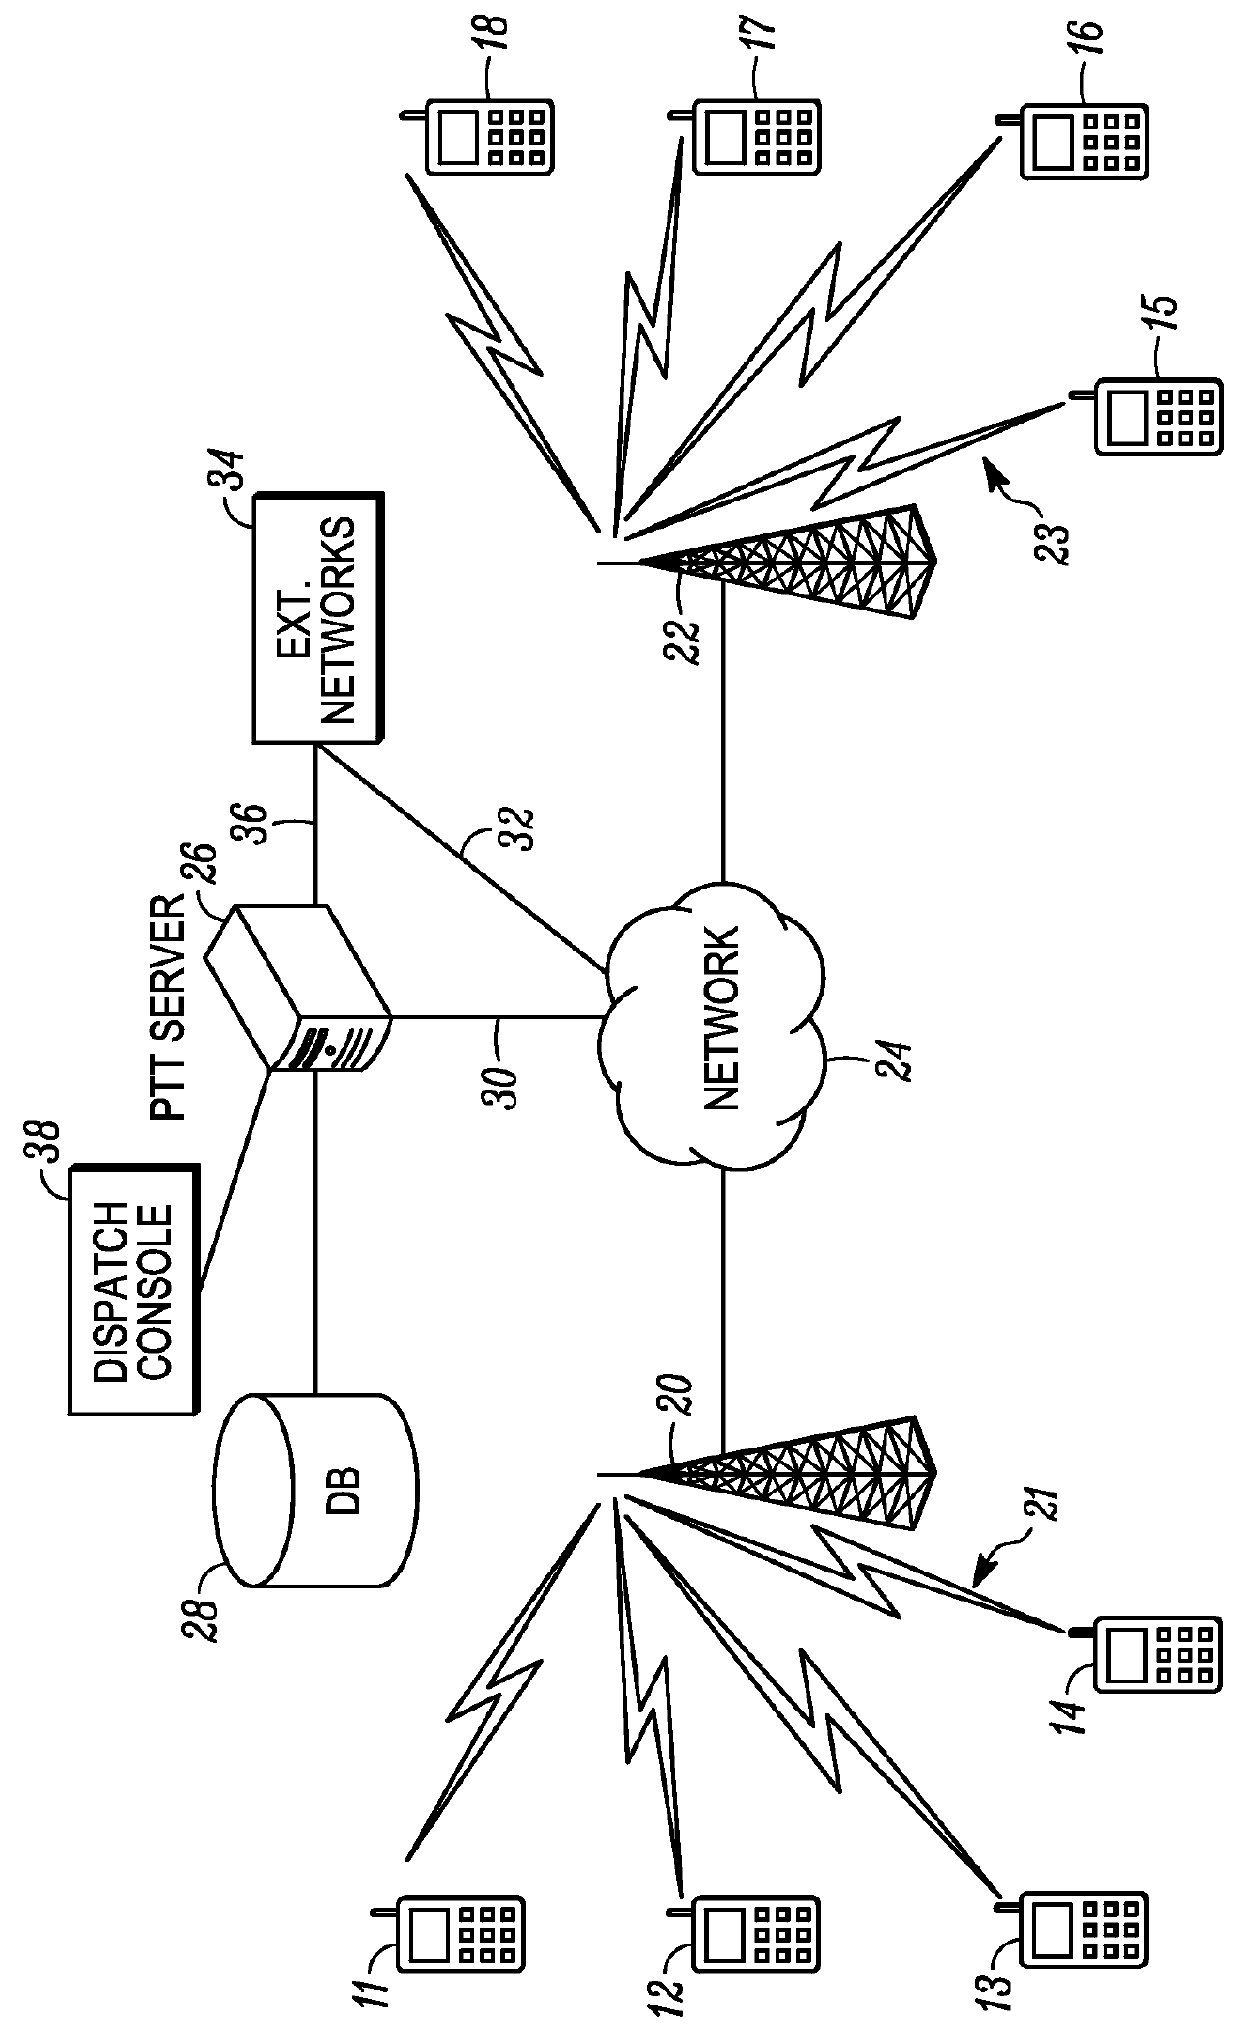 Method and apparatus for reducing call setup delay